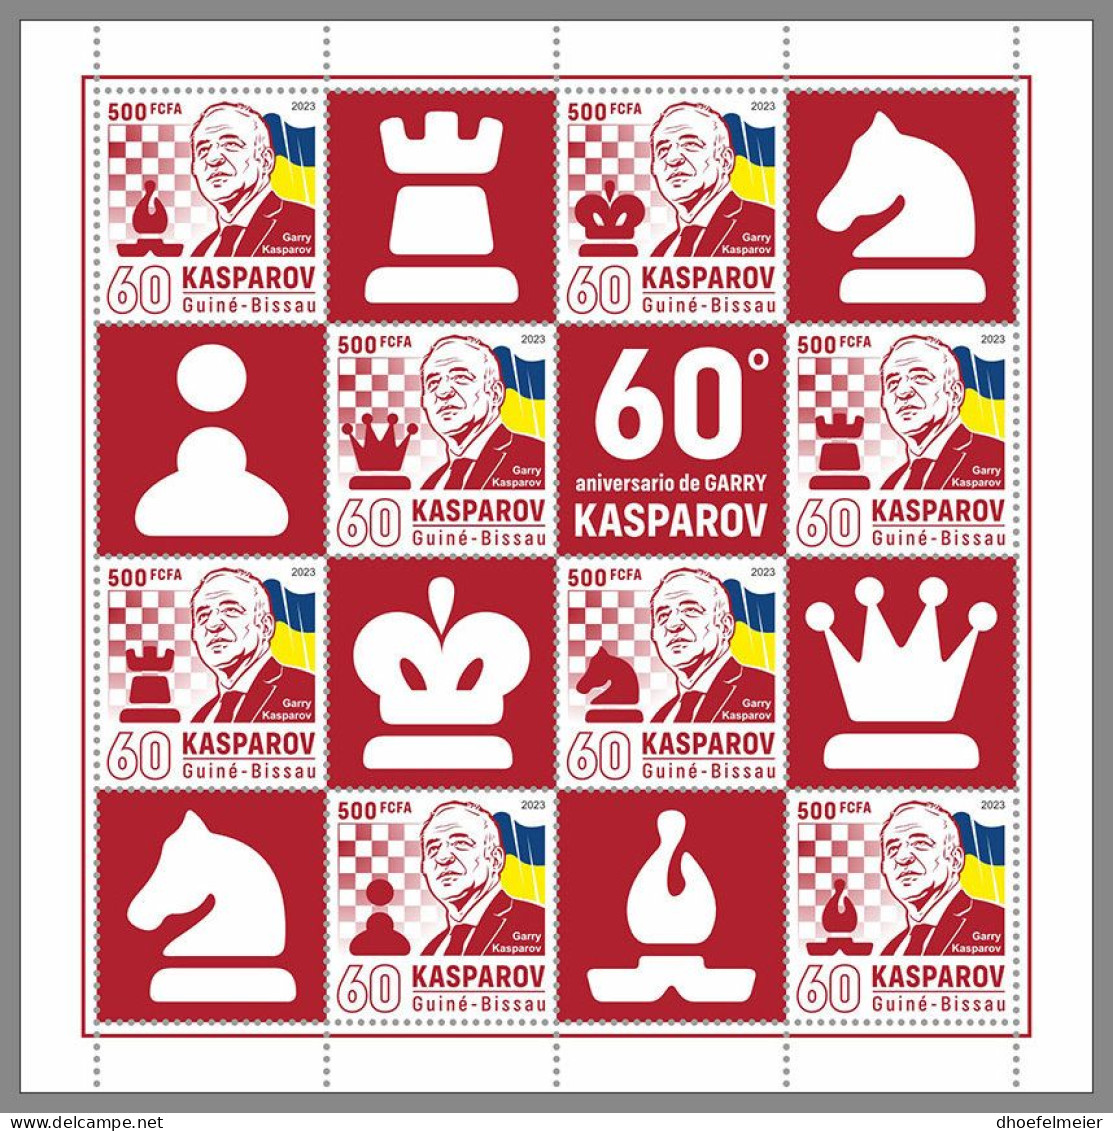 GUINEA REP.-BISSAU 2023 MNH Garry Kasparov Chess Schach M/S – OFFICIAL ISSUE – DHQ2419 - Scacchi